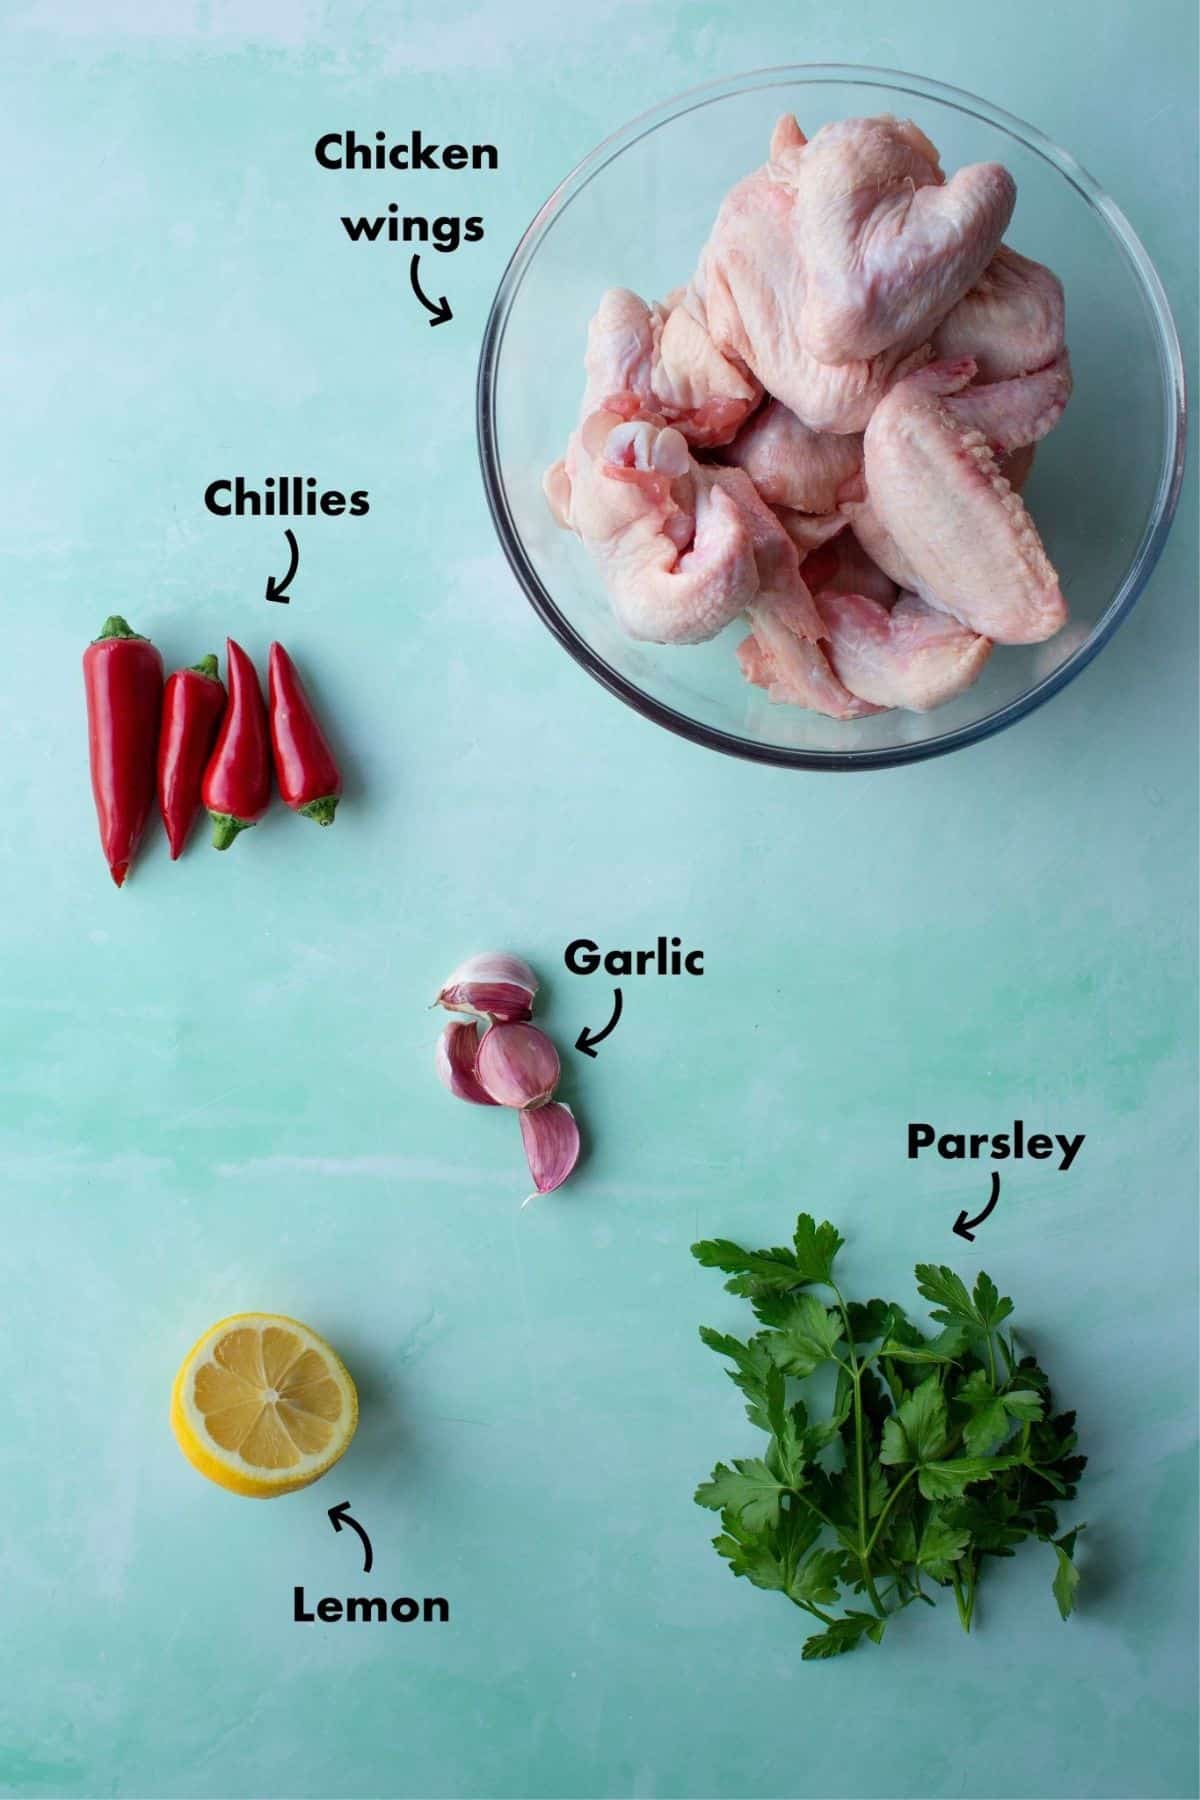 Ingredients to make the chicken wings laid out on a plae blue background and labelled.